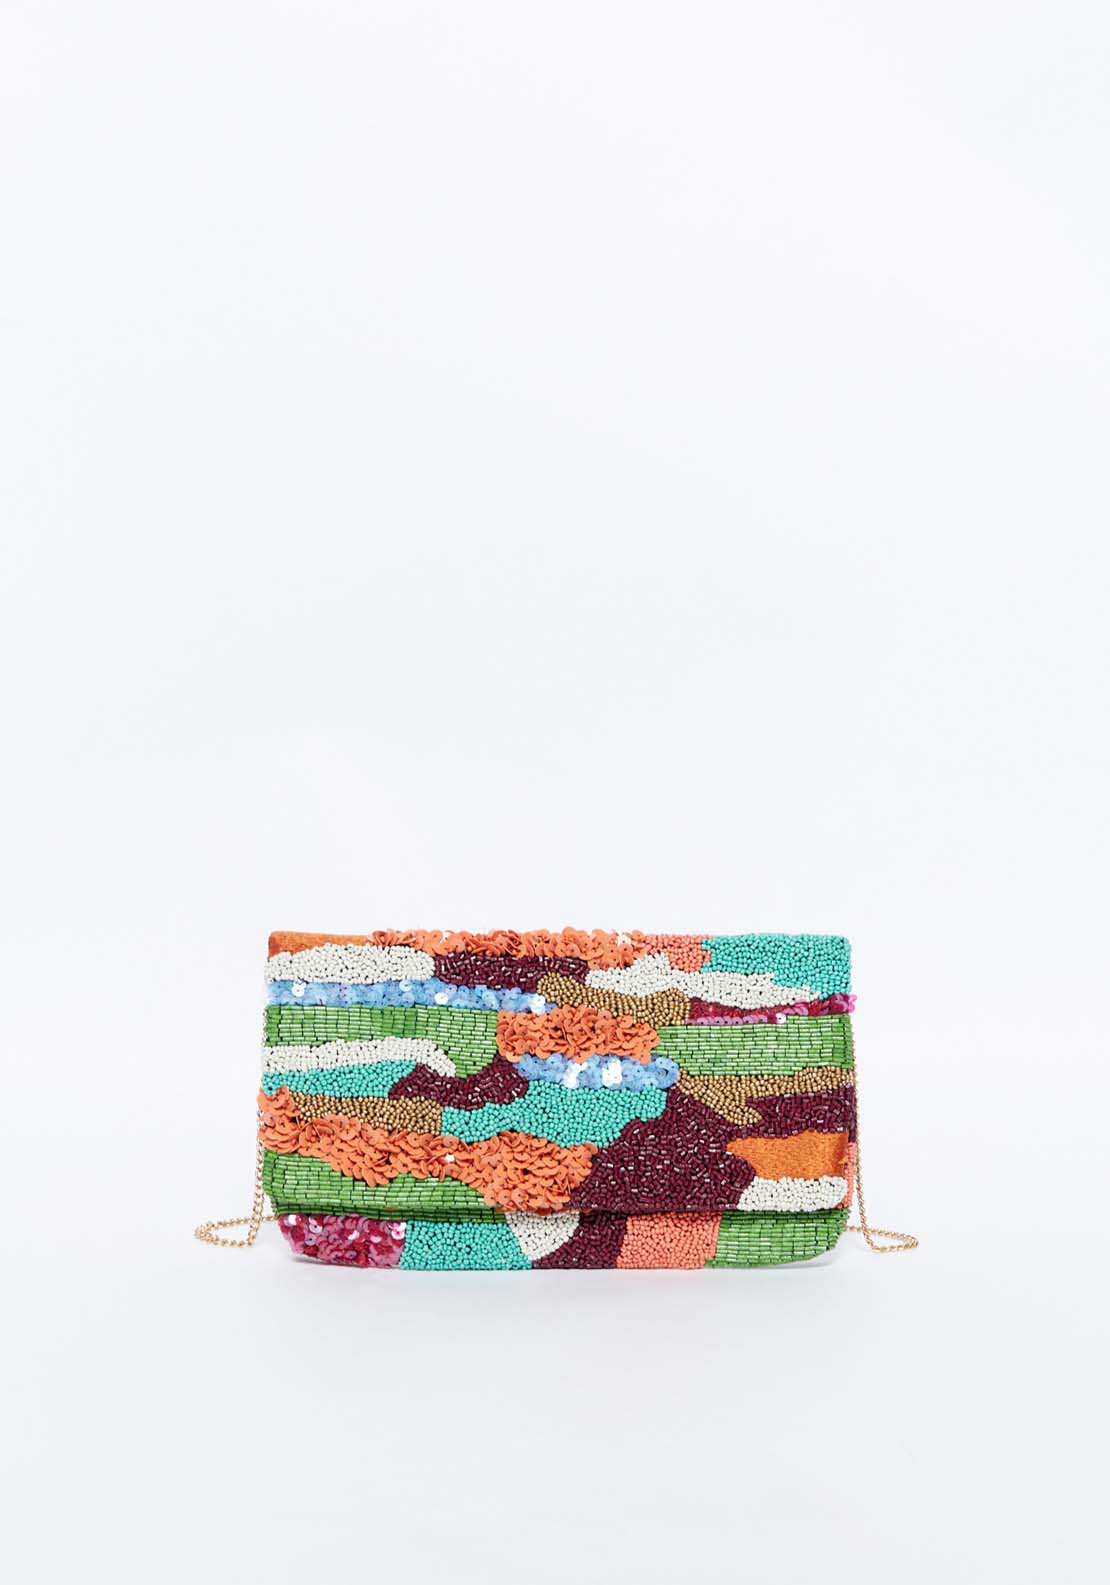 Sfera Beads clutch bag 1 Shaws Department Stores